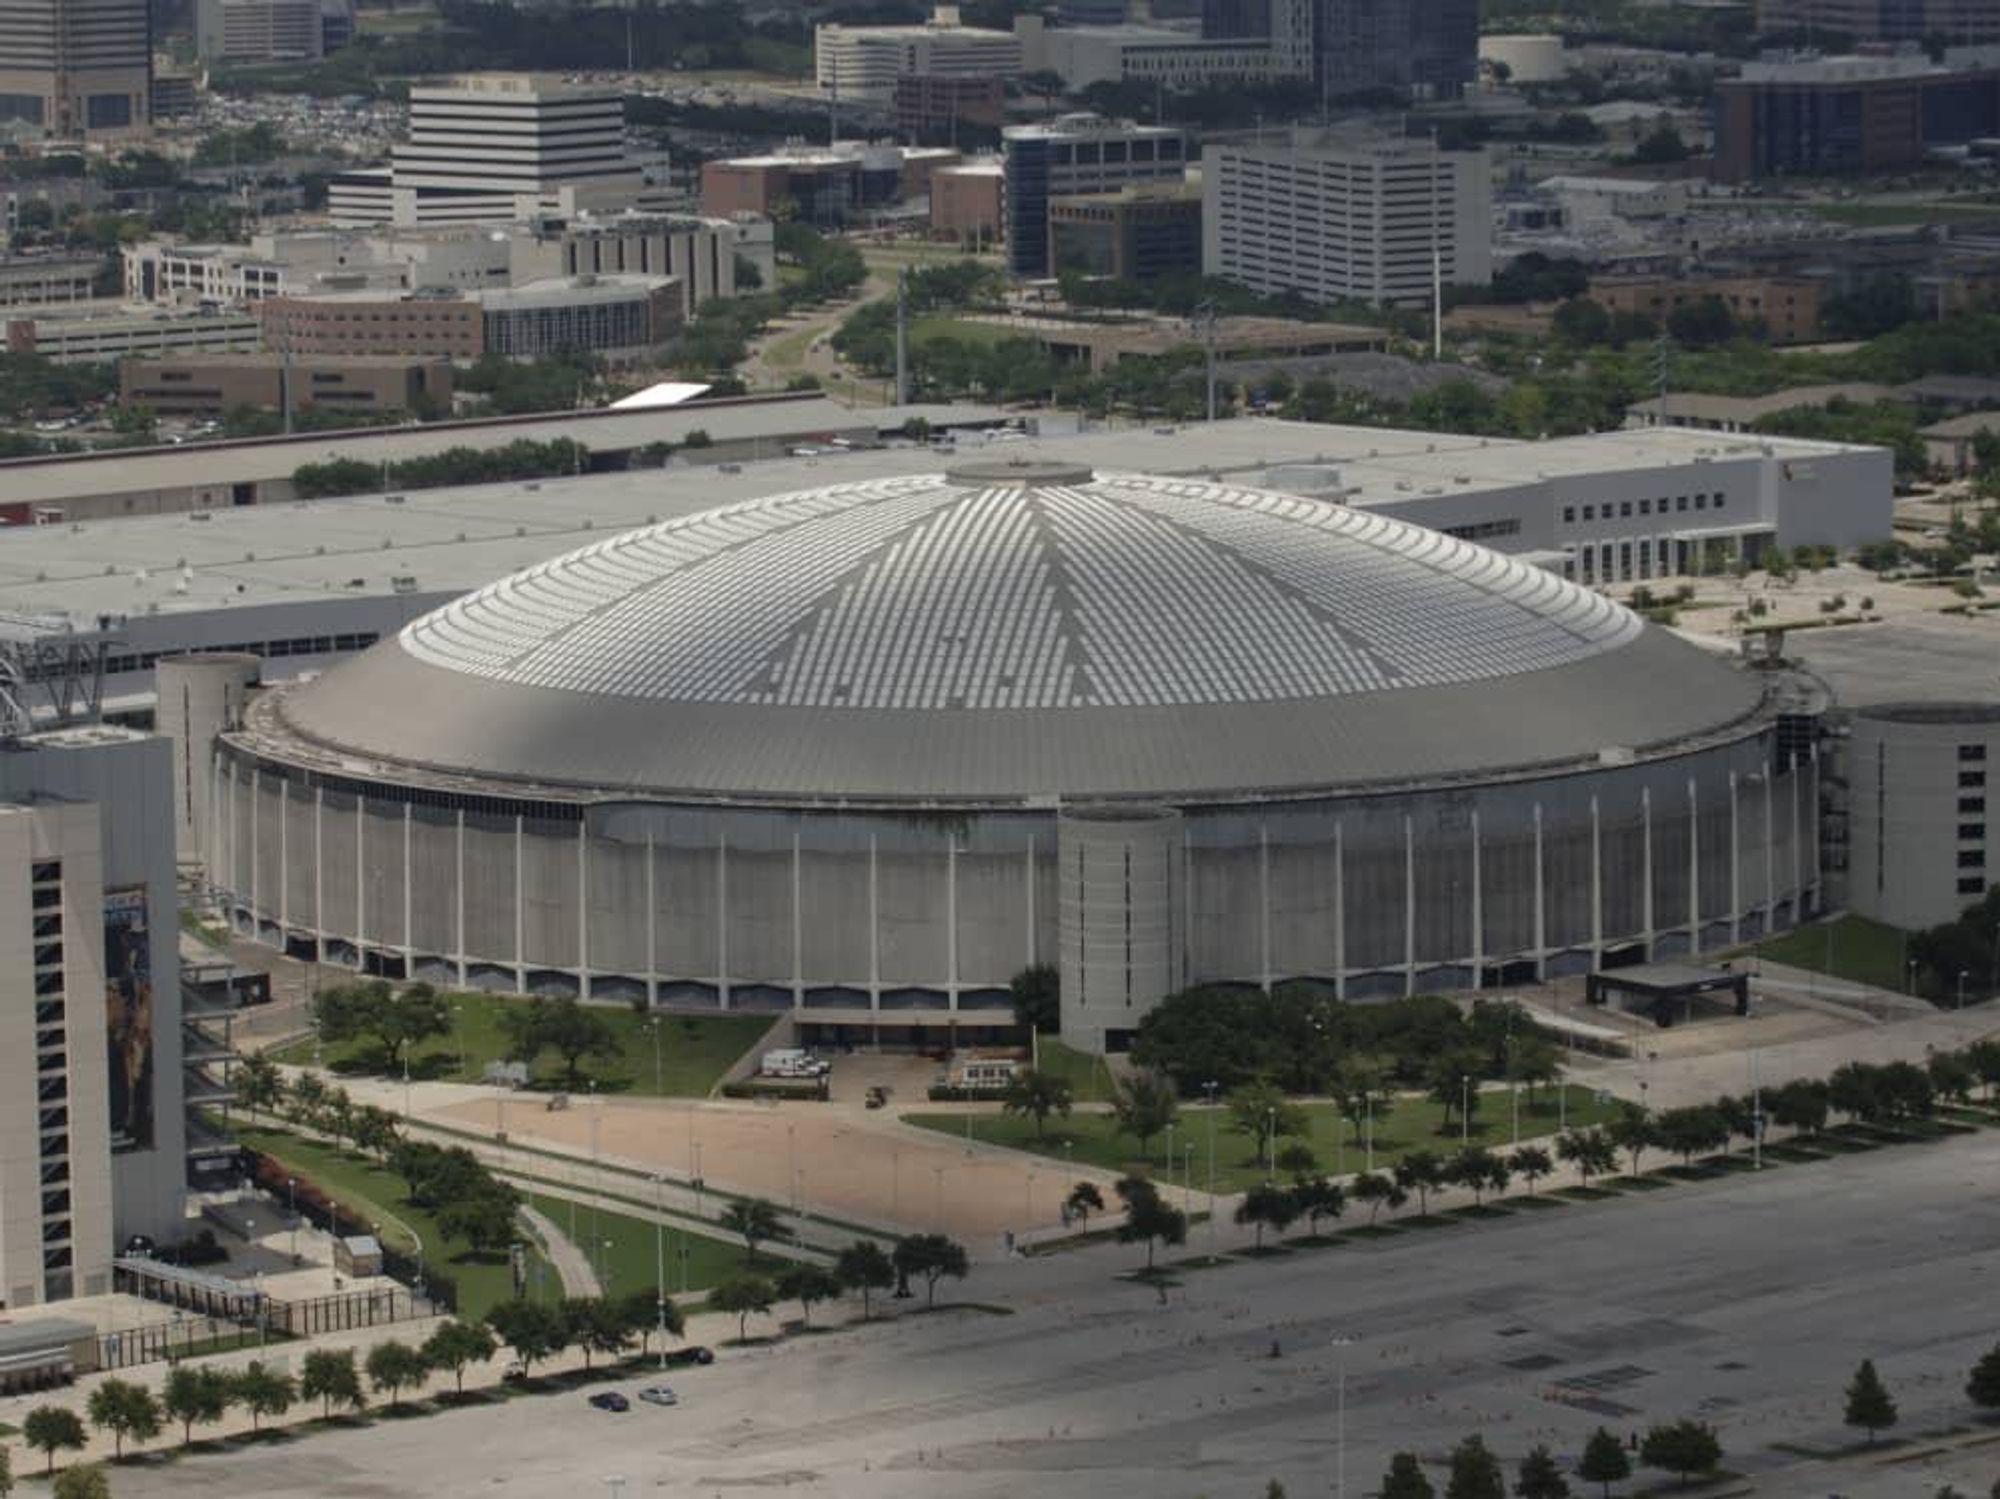 Places_Astrodome_aerial view